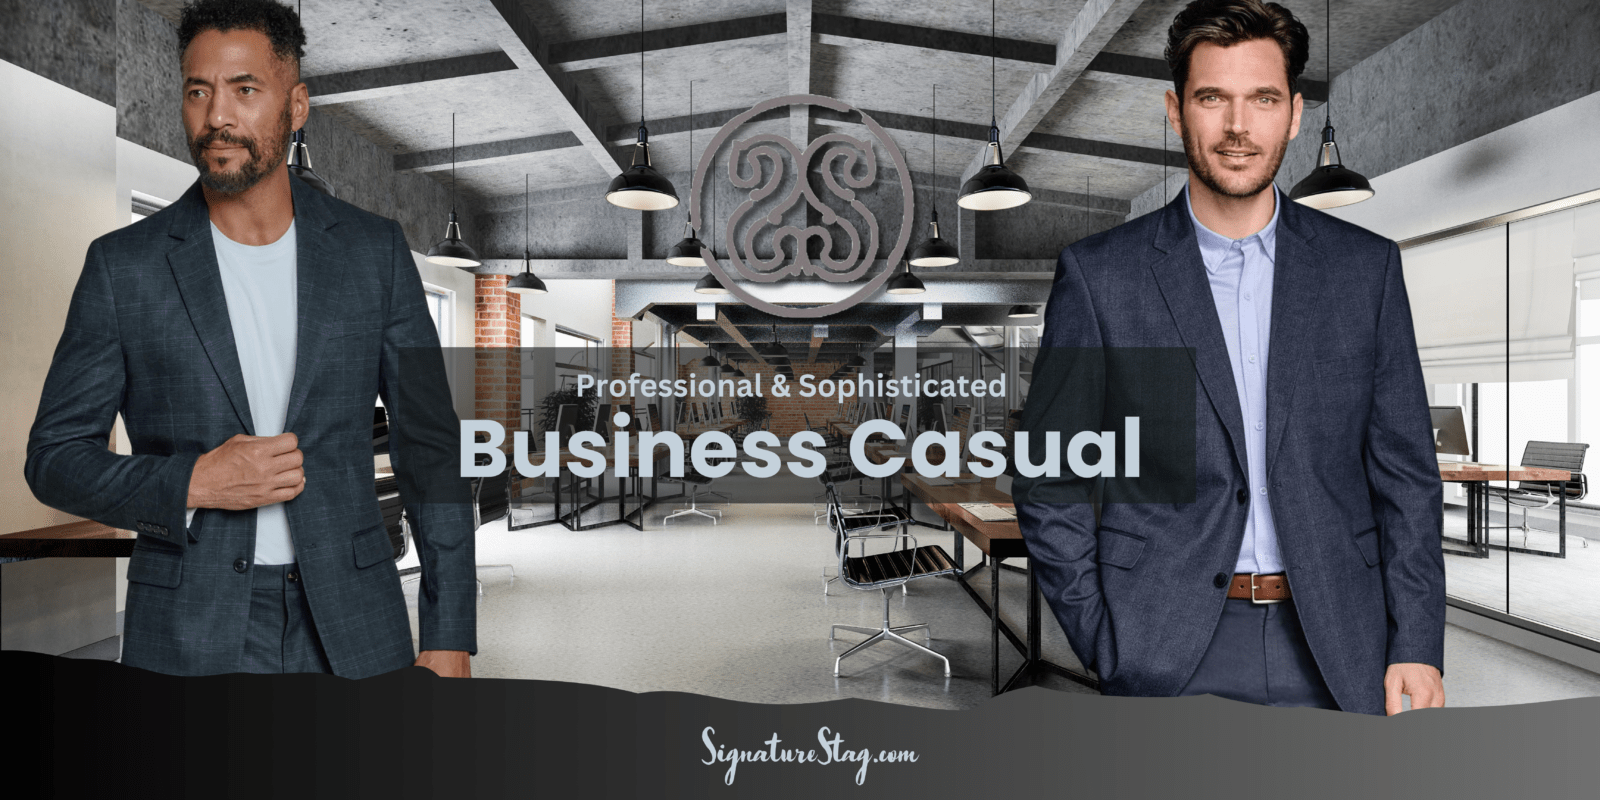 Men'Business Casual Clothing Stores in Lubbock TX and Midland TX. Business casual attire is broadly defined as a code of dress that blends traditional business wear with a more relaxed style.